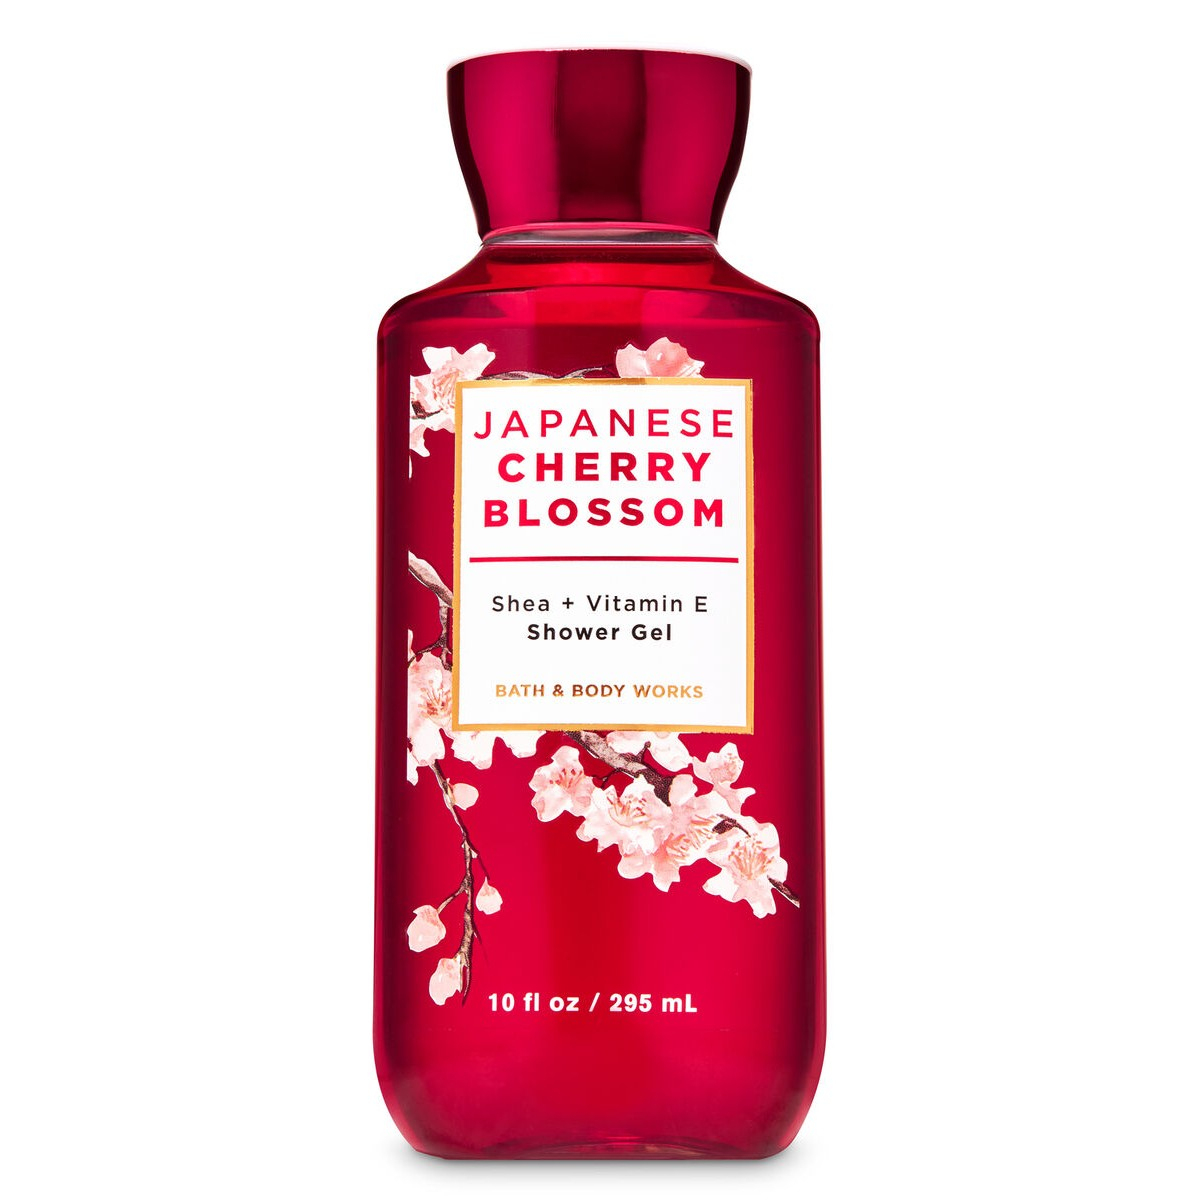 Bath And Body Works Gel Douche Japanese Cherry Blossom serapportantà Gel Douche Cars